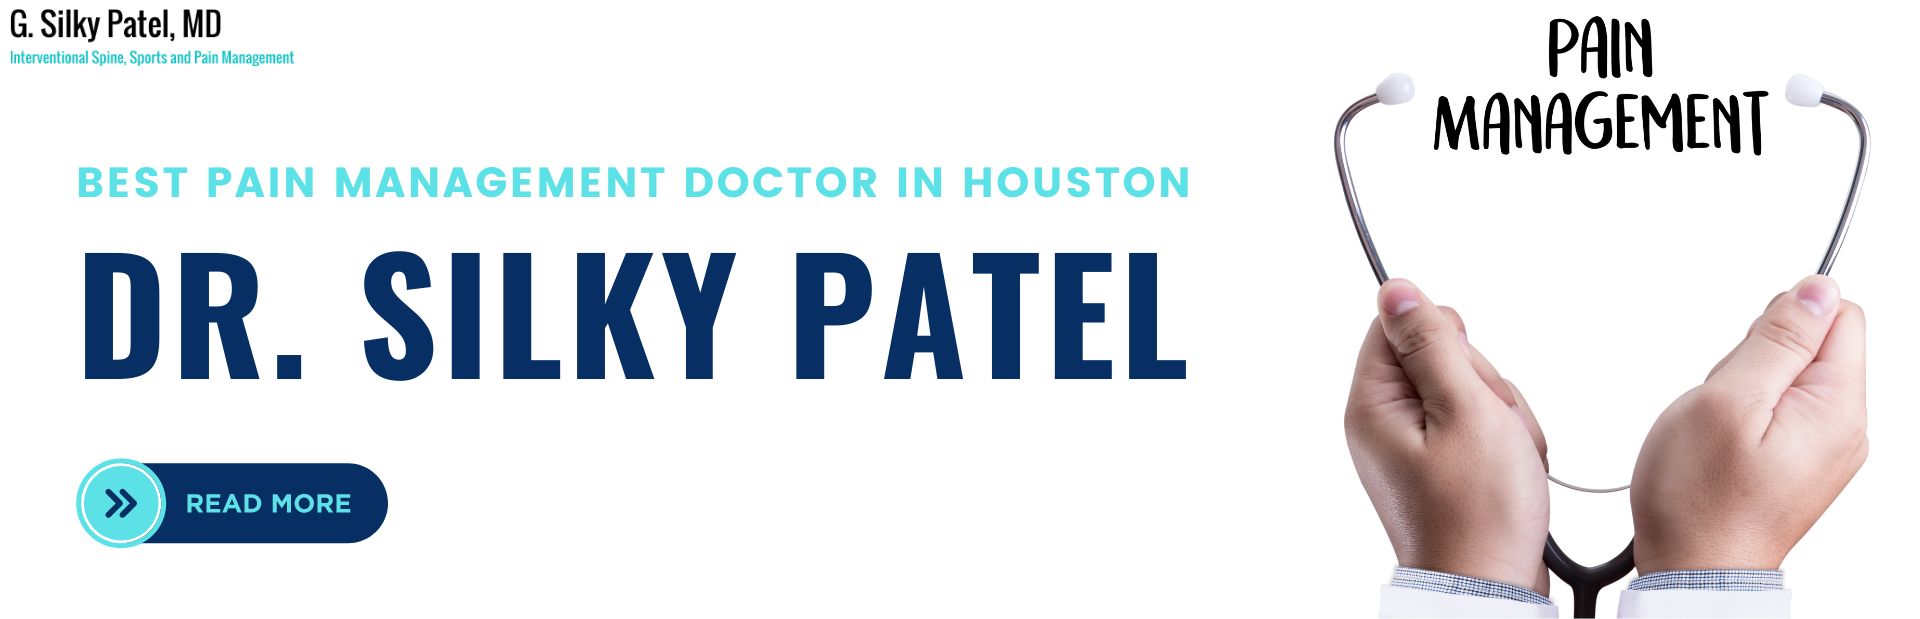 Best Pain Management Doctor - Silky Patel MD